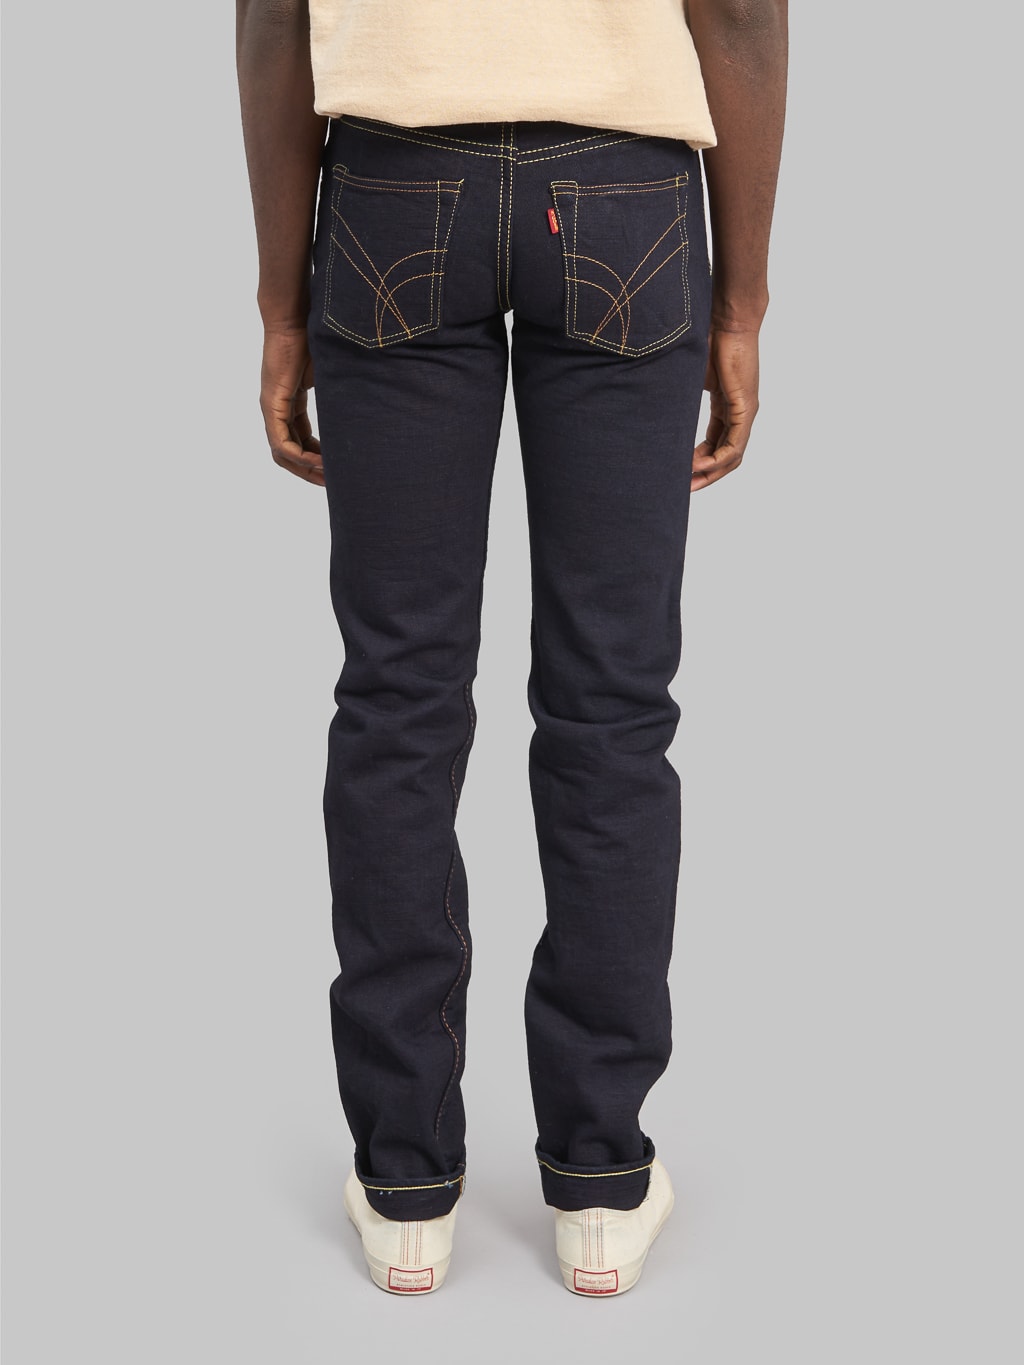 The Strike Gold 5004ID Double Indigo Straight Tapered Jeans